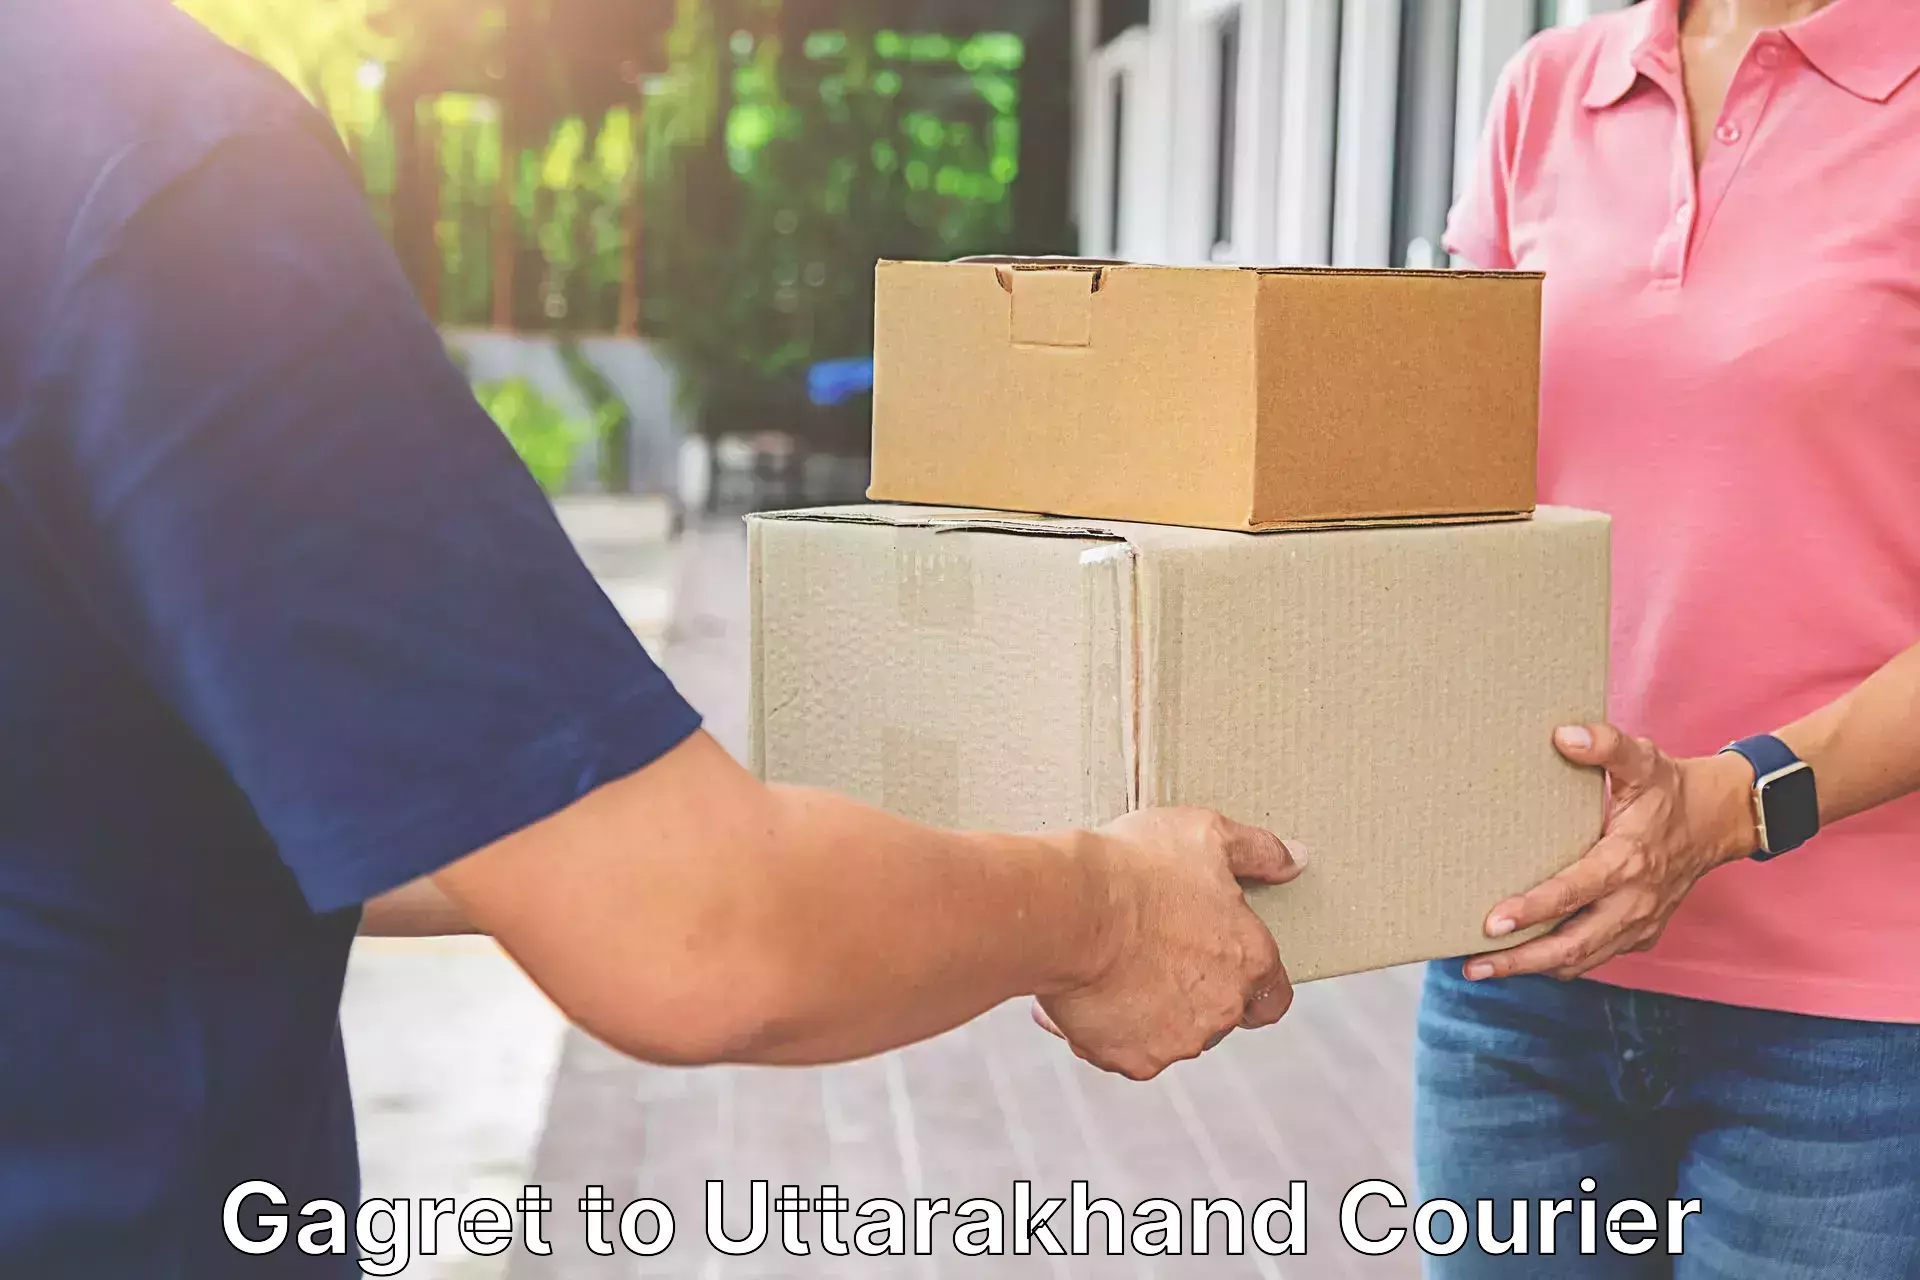 Full-service courier options Gagret to Rishikesh